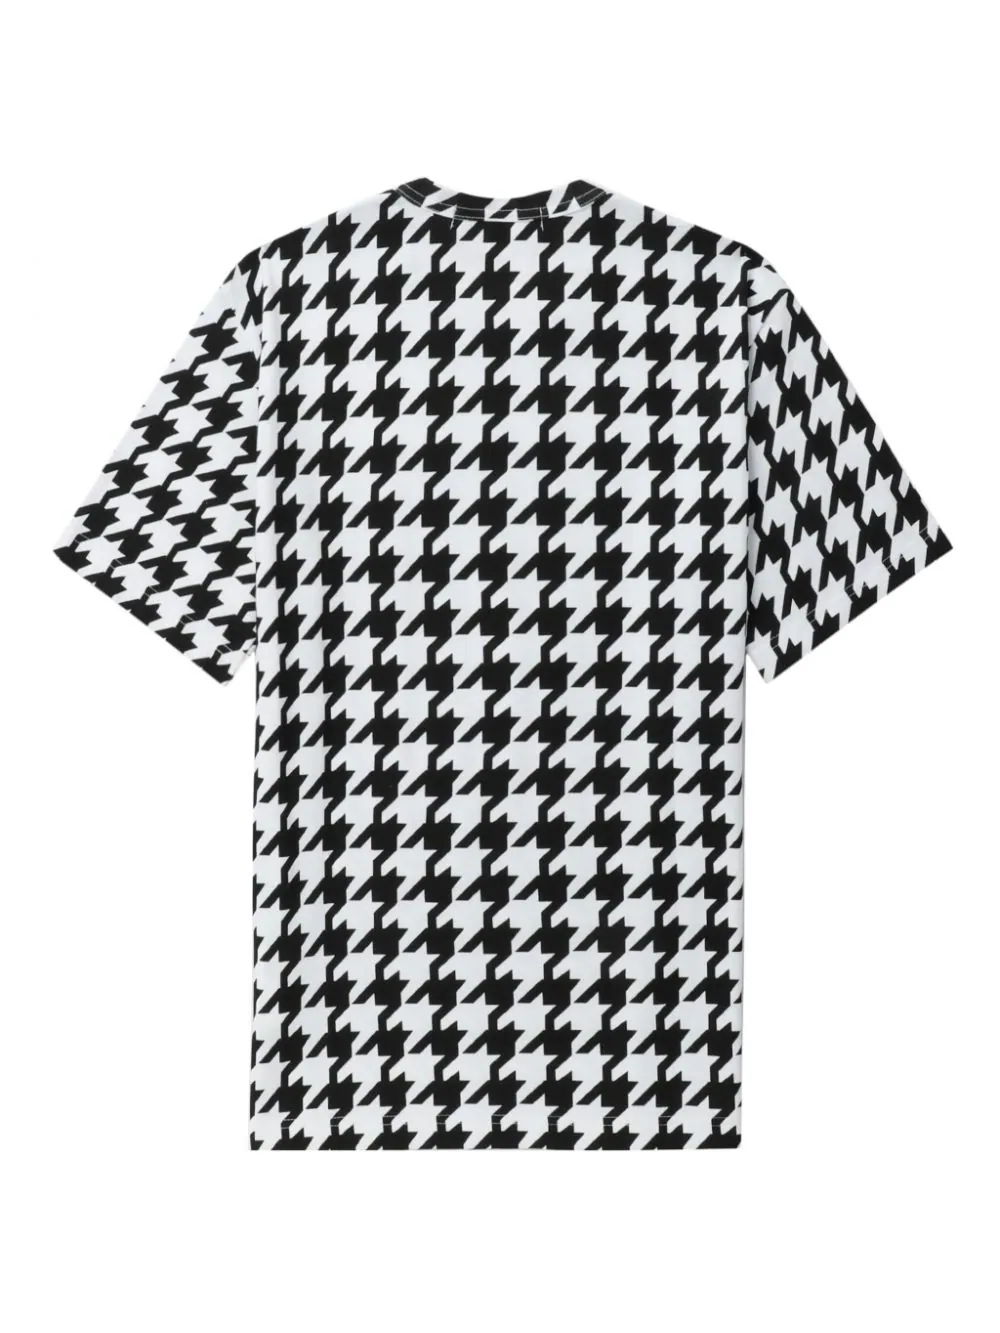 Houndstooth Pattern Tee